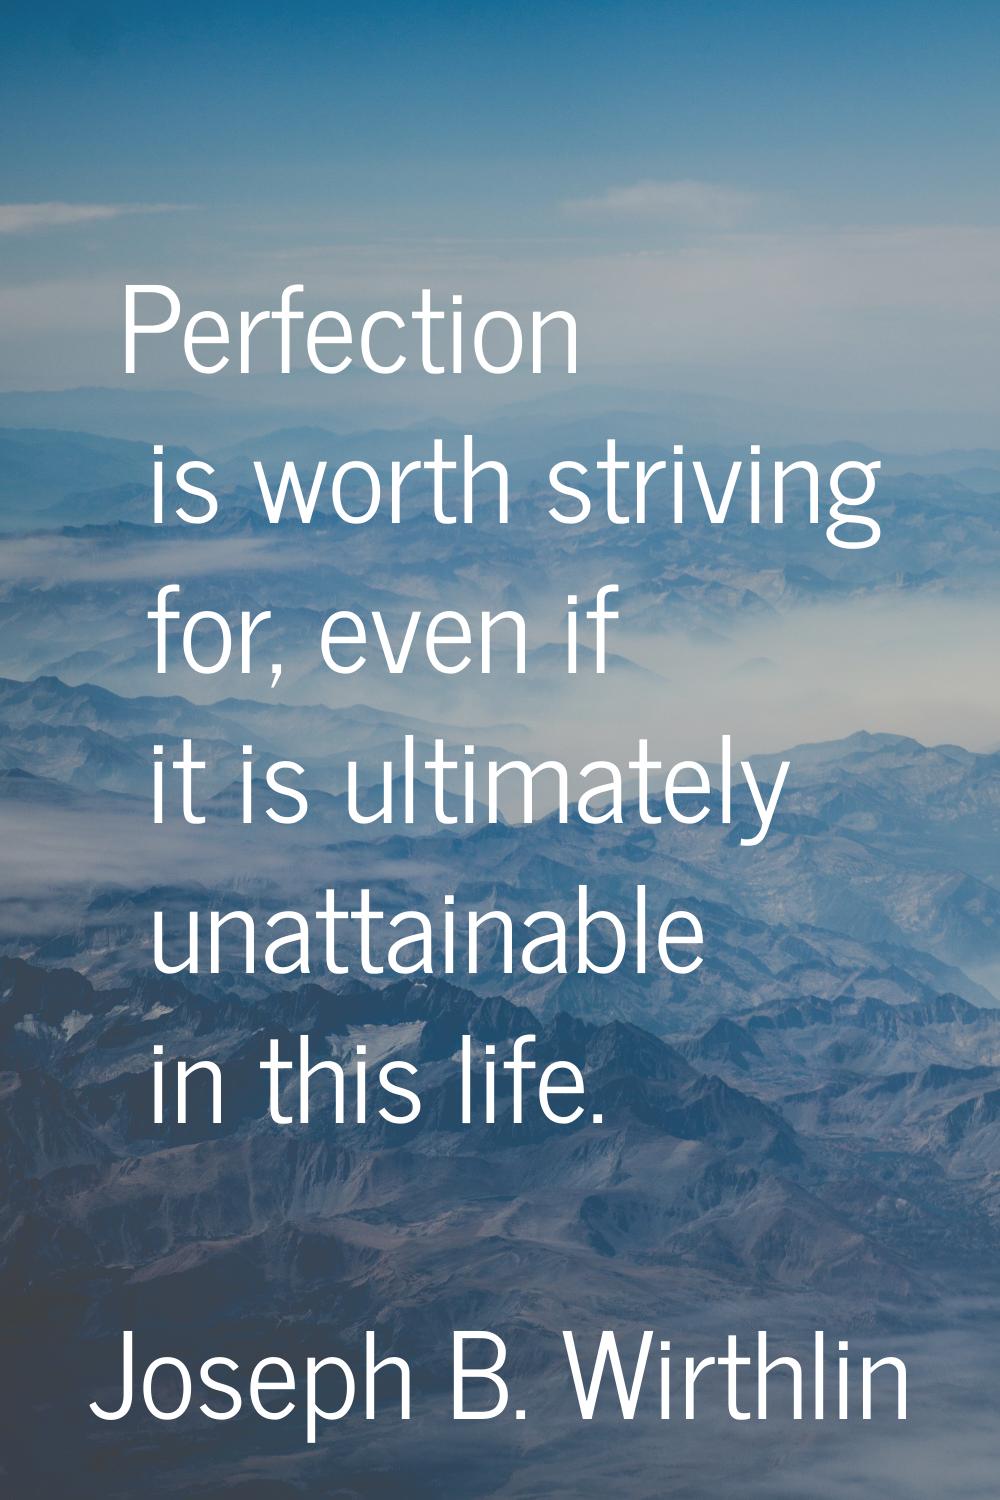 Perfection is worth striving for, even if it is ultimately unattainable in this life.